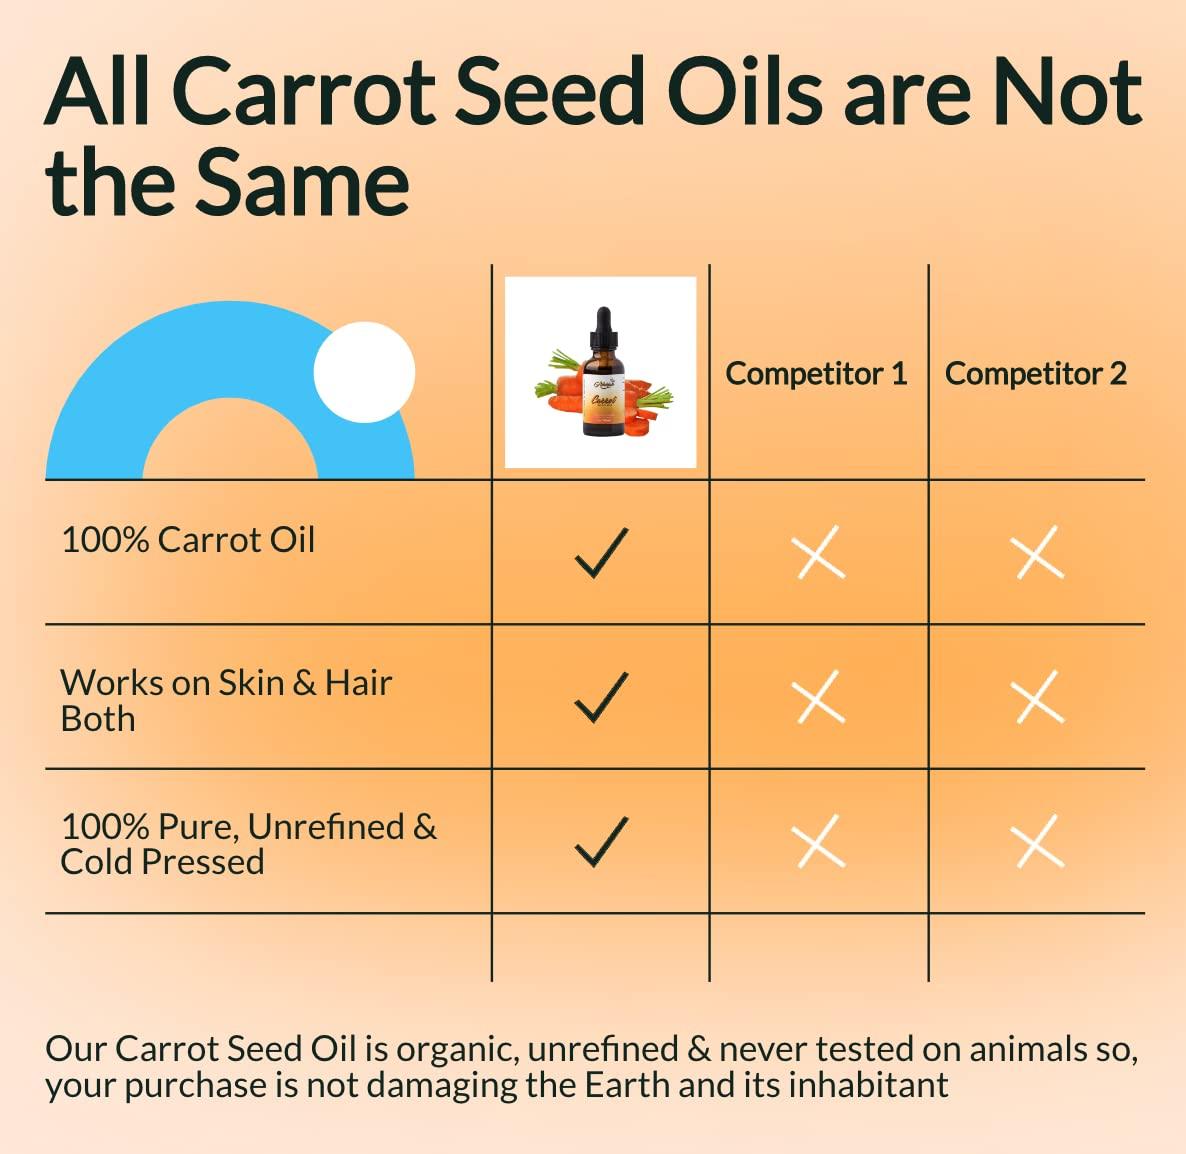  Carrot Seed Oil Organic Body Oil Cold Pressed Natural Hair Oil  Nail Oil Skin Moisturizer Face Oil compare with Essential Oil , Face  Moisturizer Hair Growth Oil Body Oils For Women